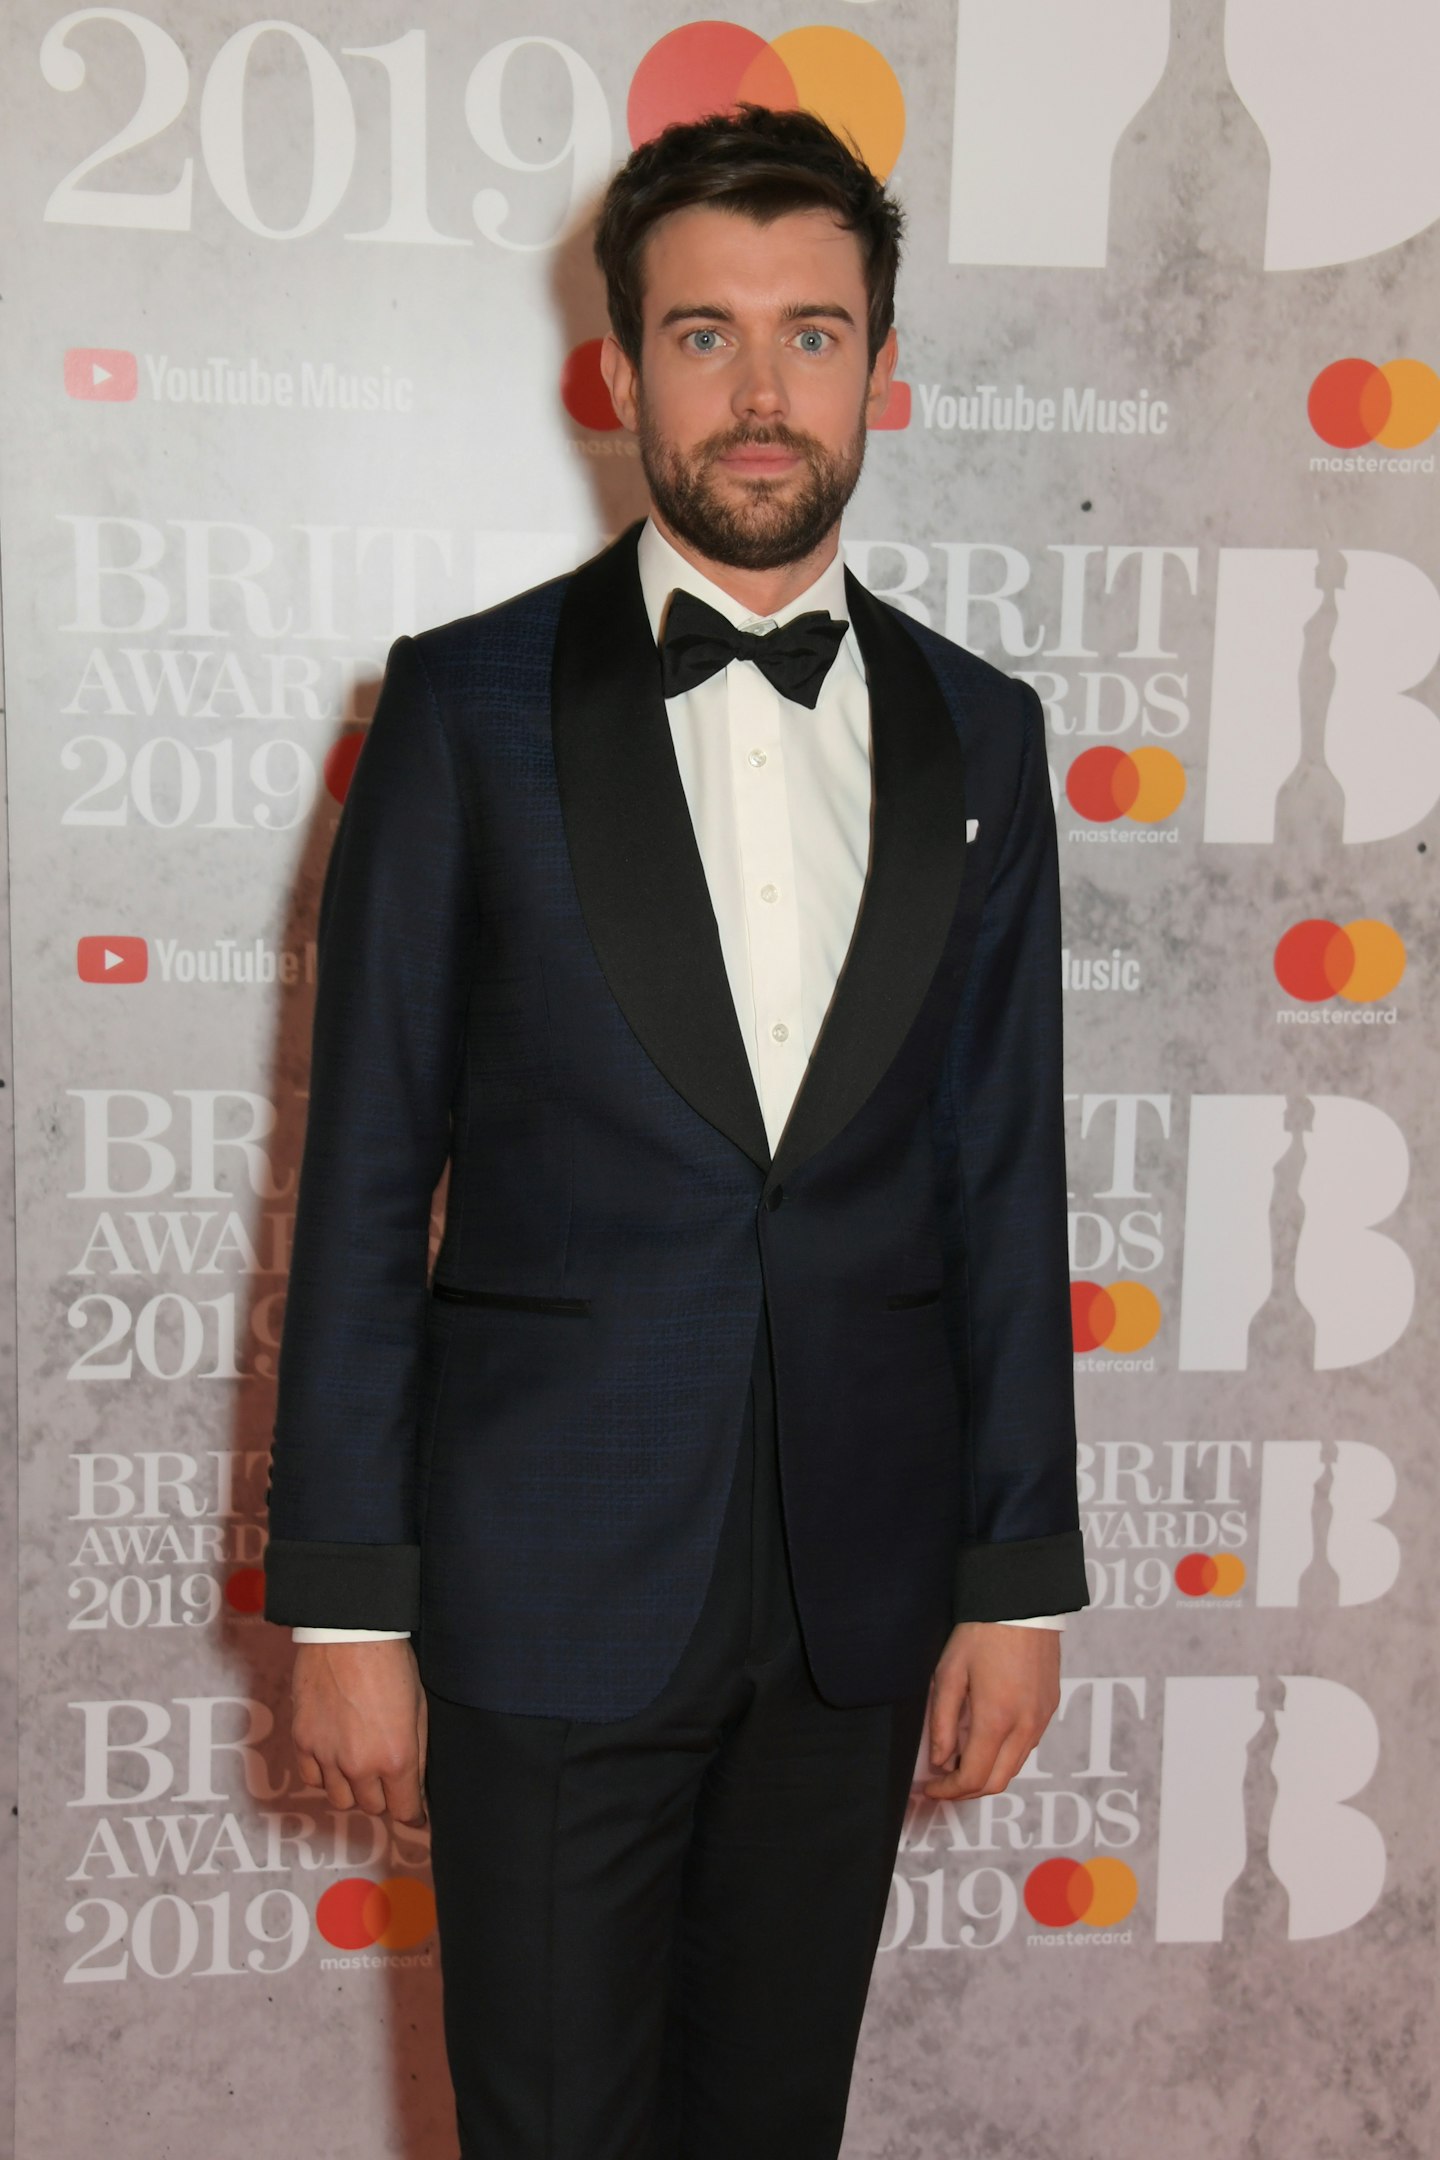 BRITs 2019 host Jack Whithall